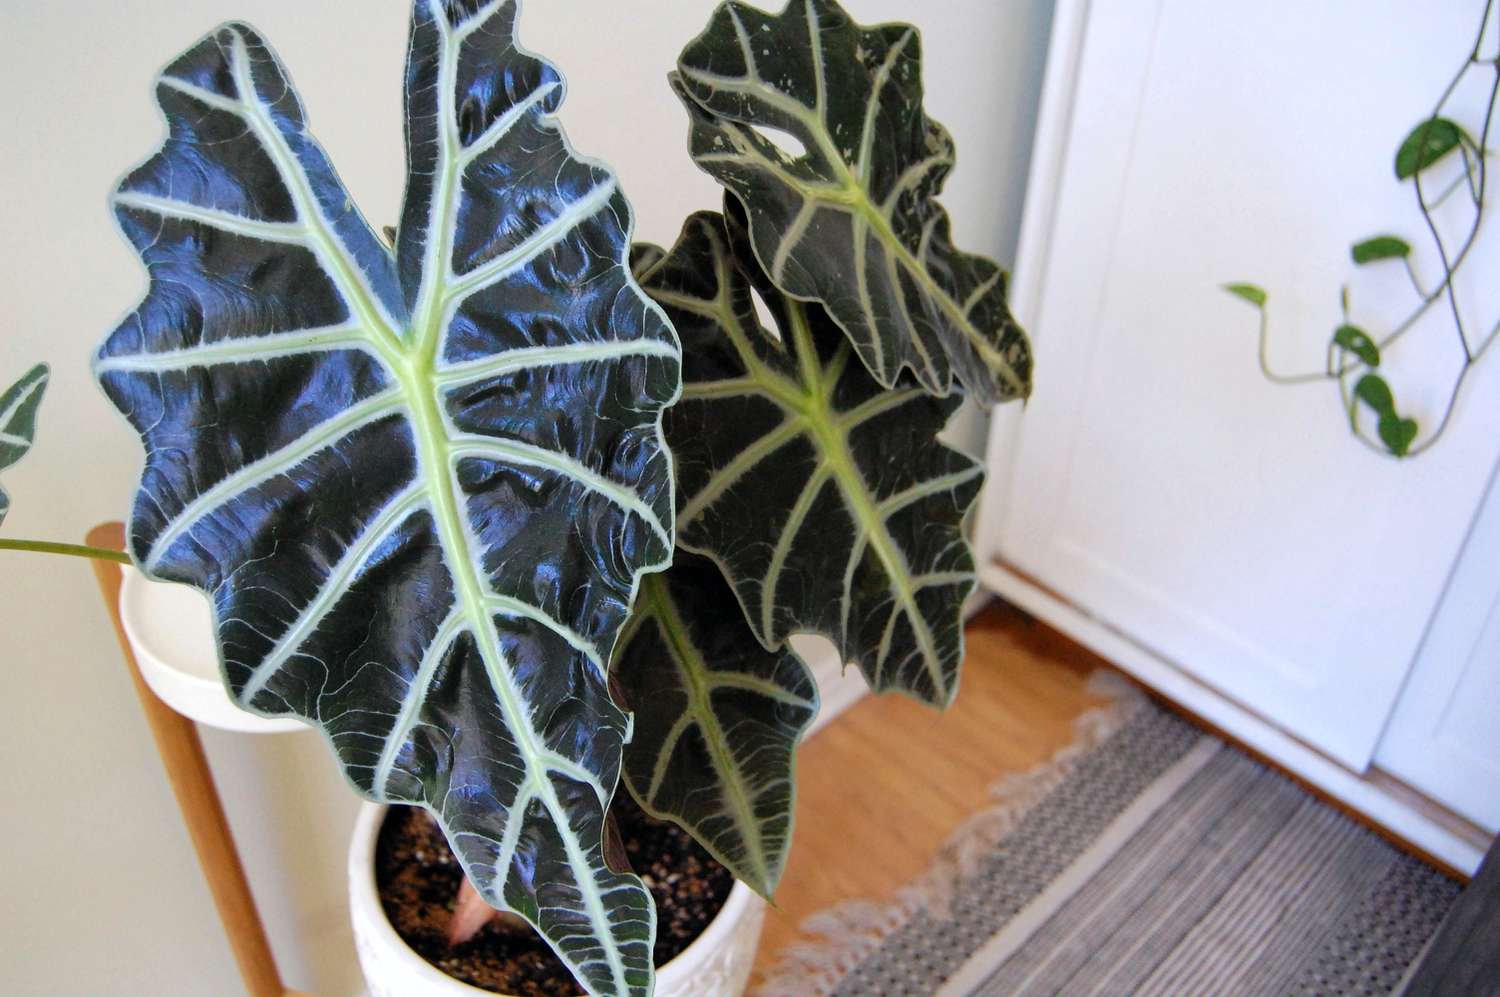 How to Care for Alocasia Plant